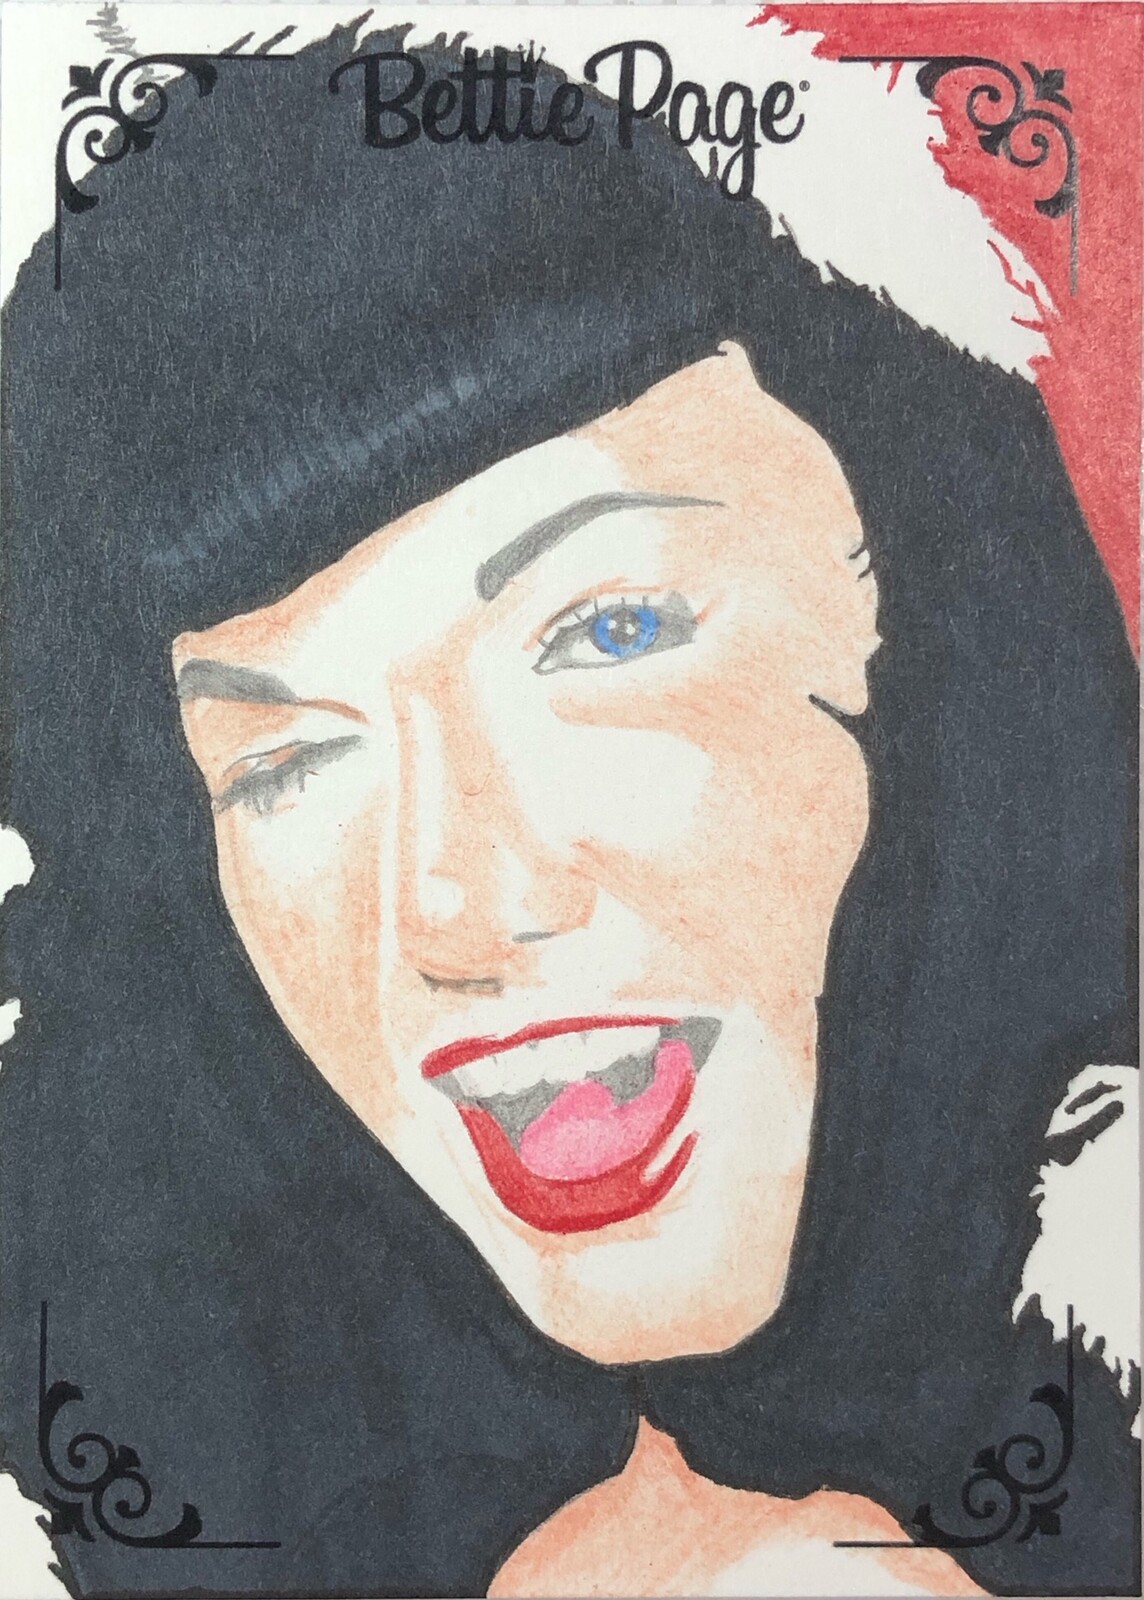 Dynamite Entertainment Officially licensed Bettie Page trading cards